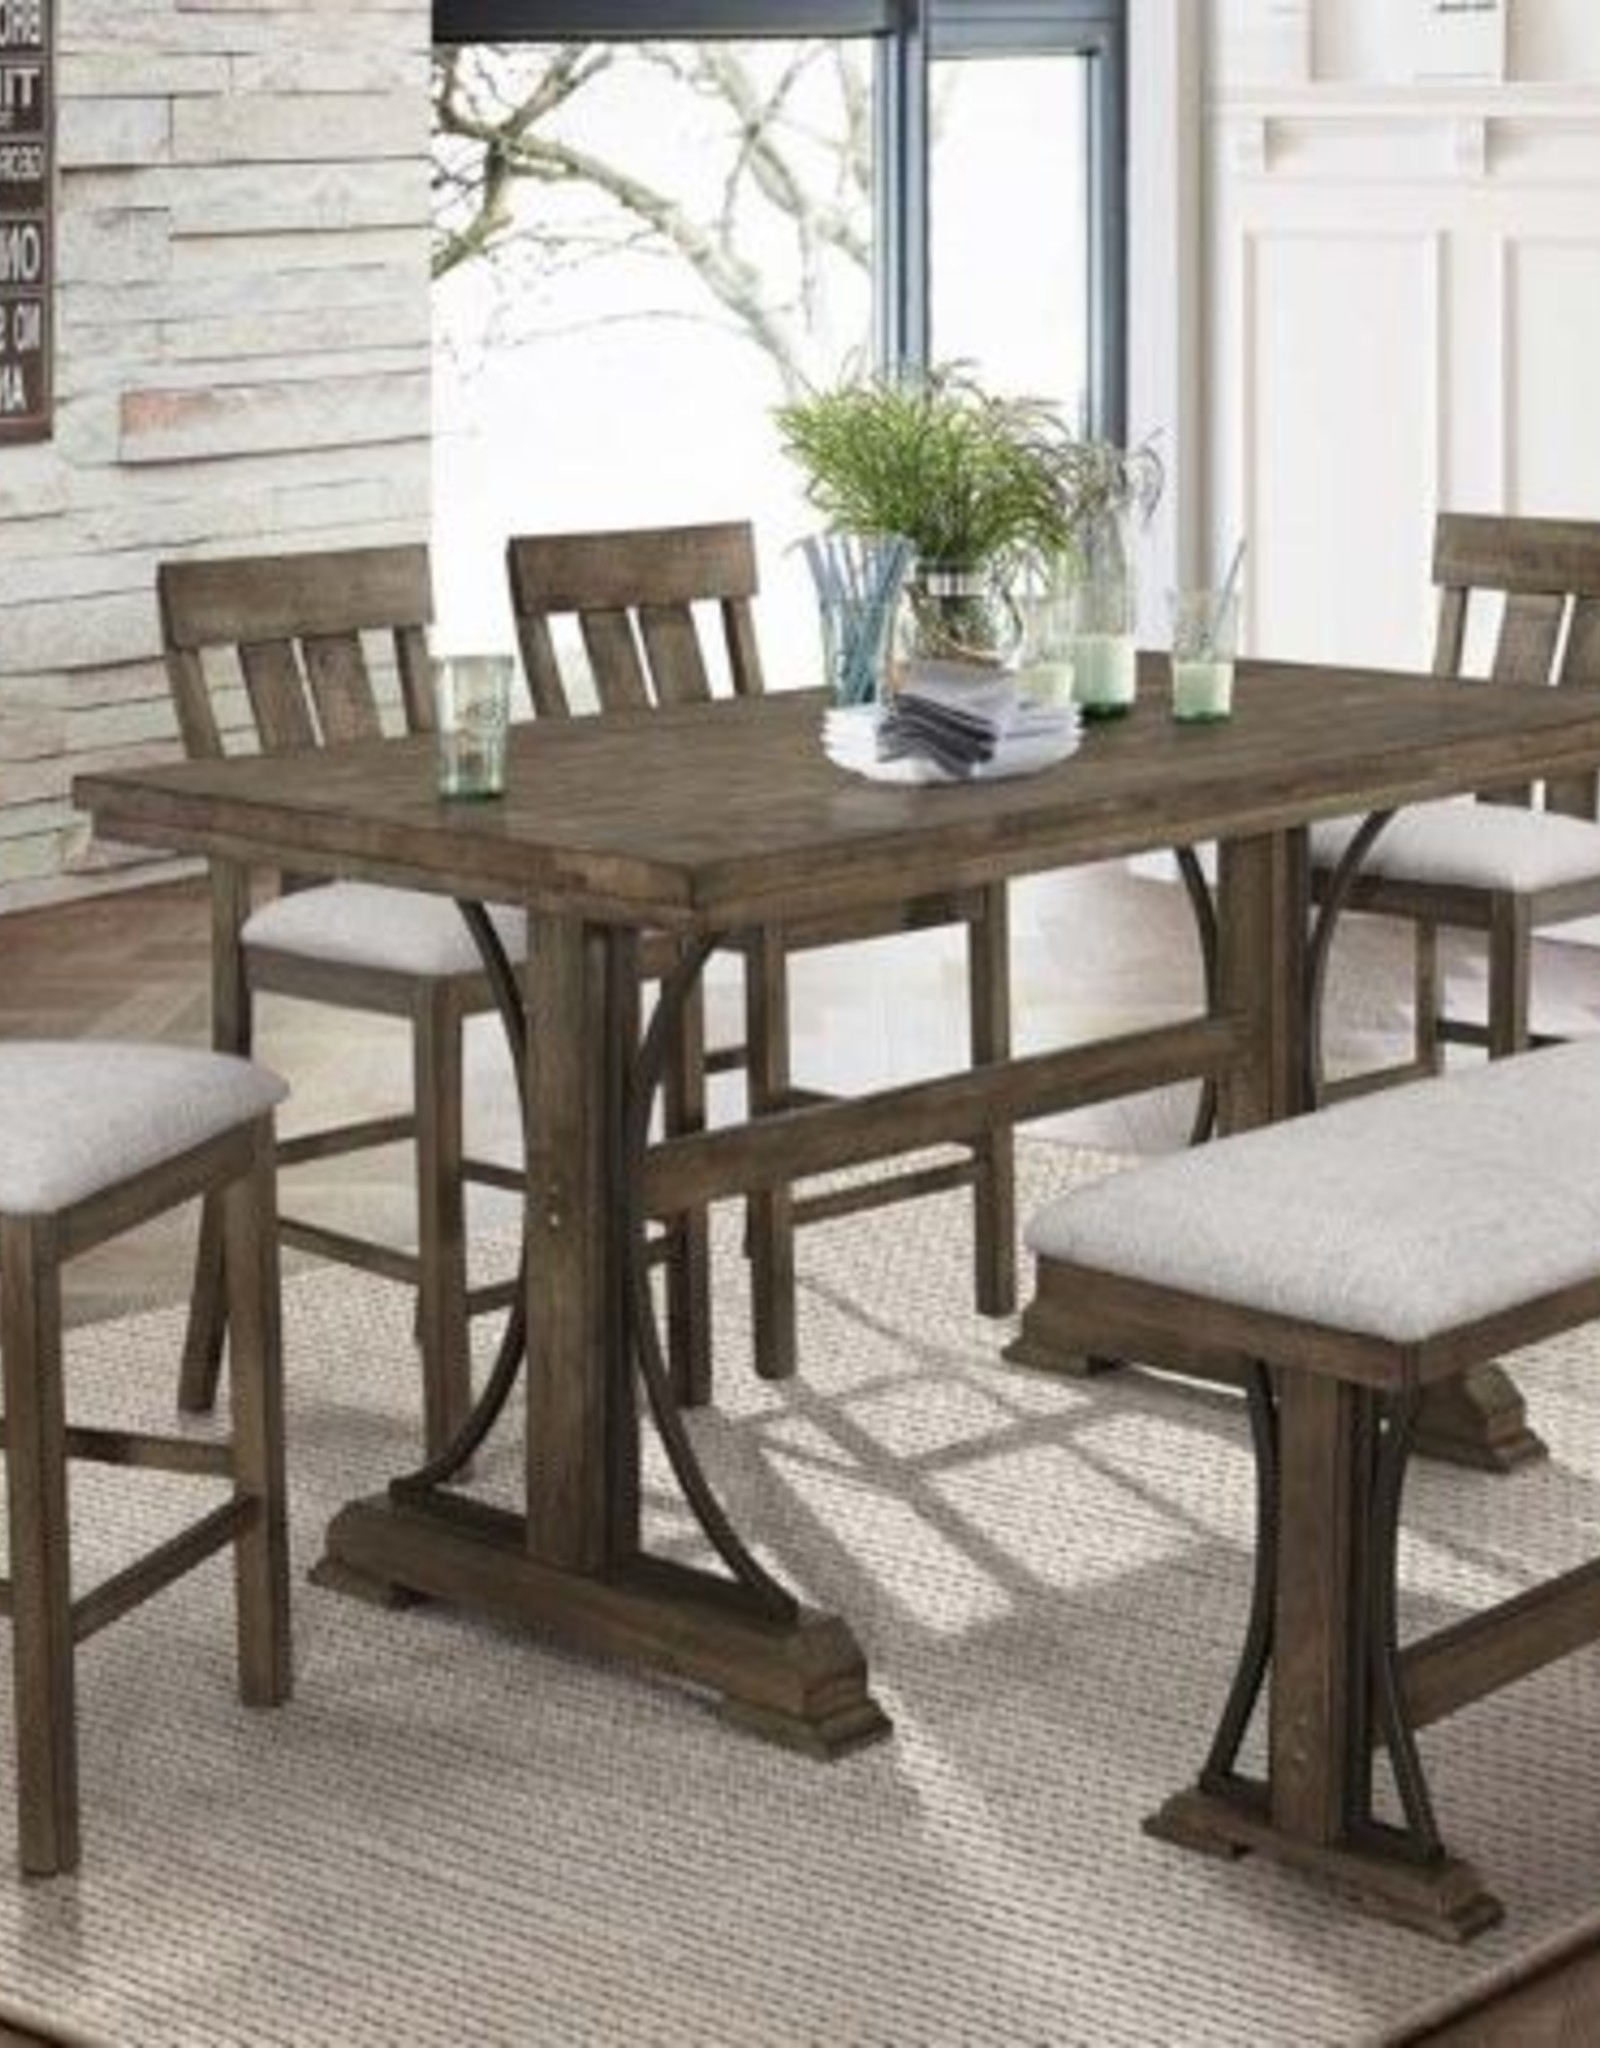 Crownmark Quincy Table w/ 4 Chairs & Bench